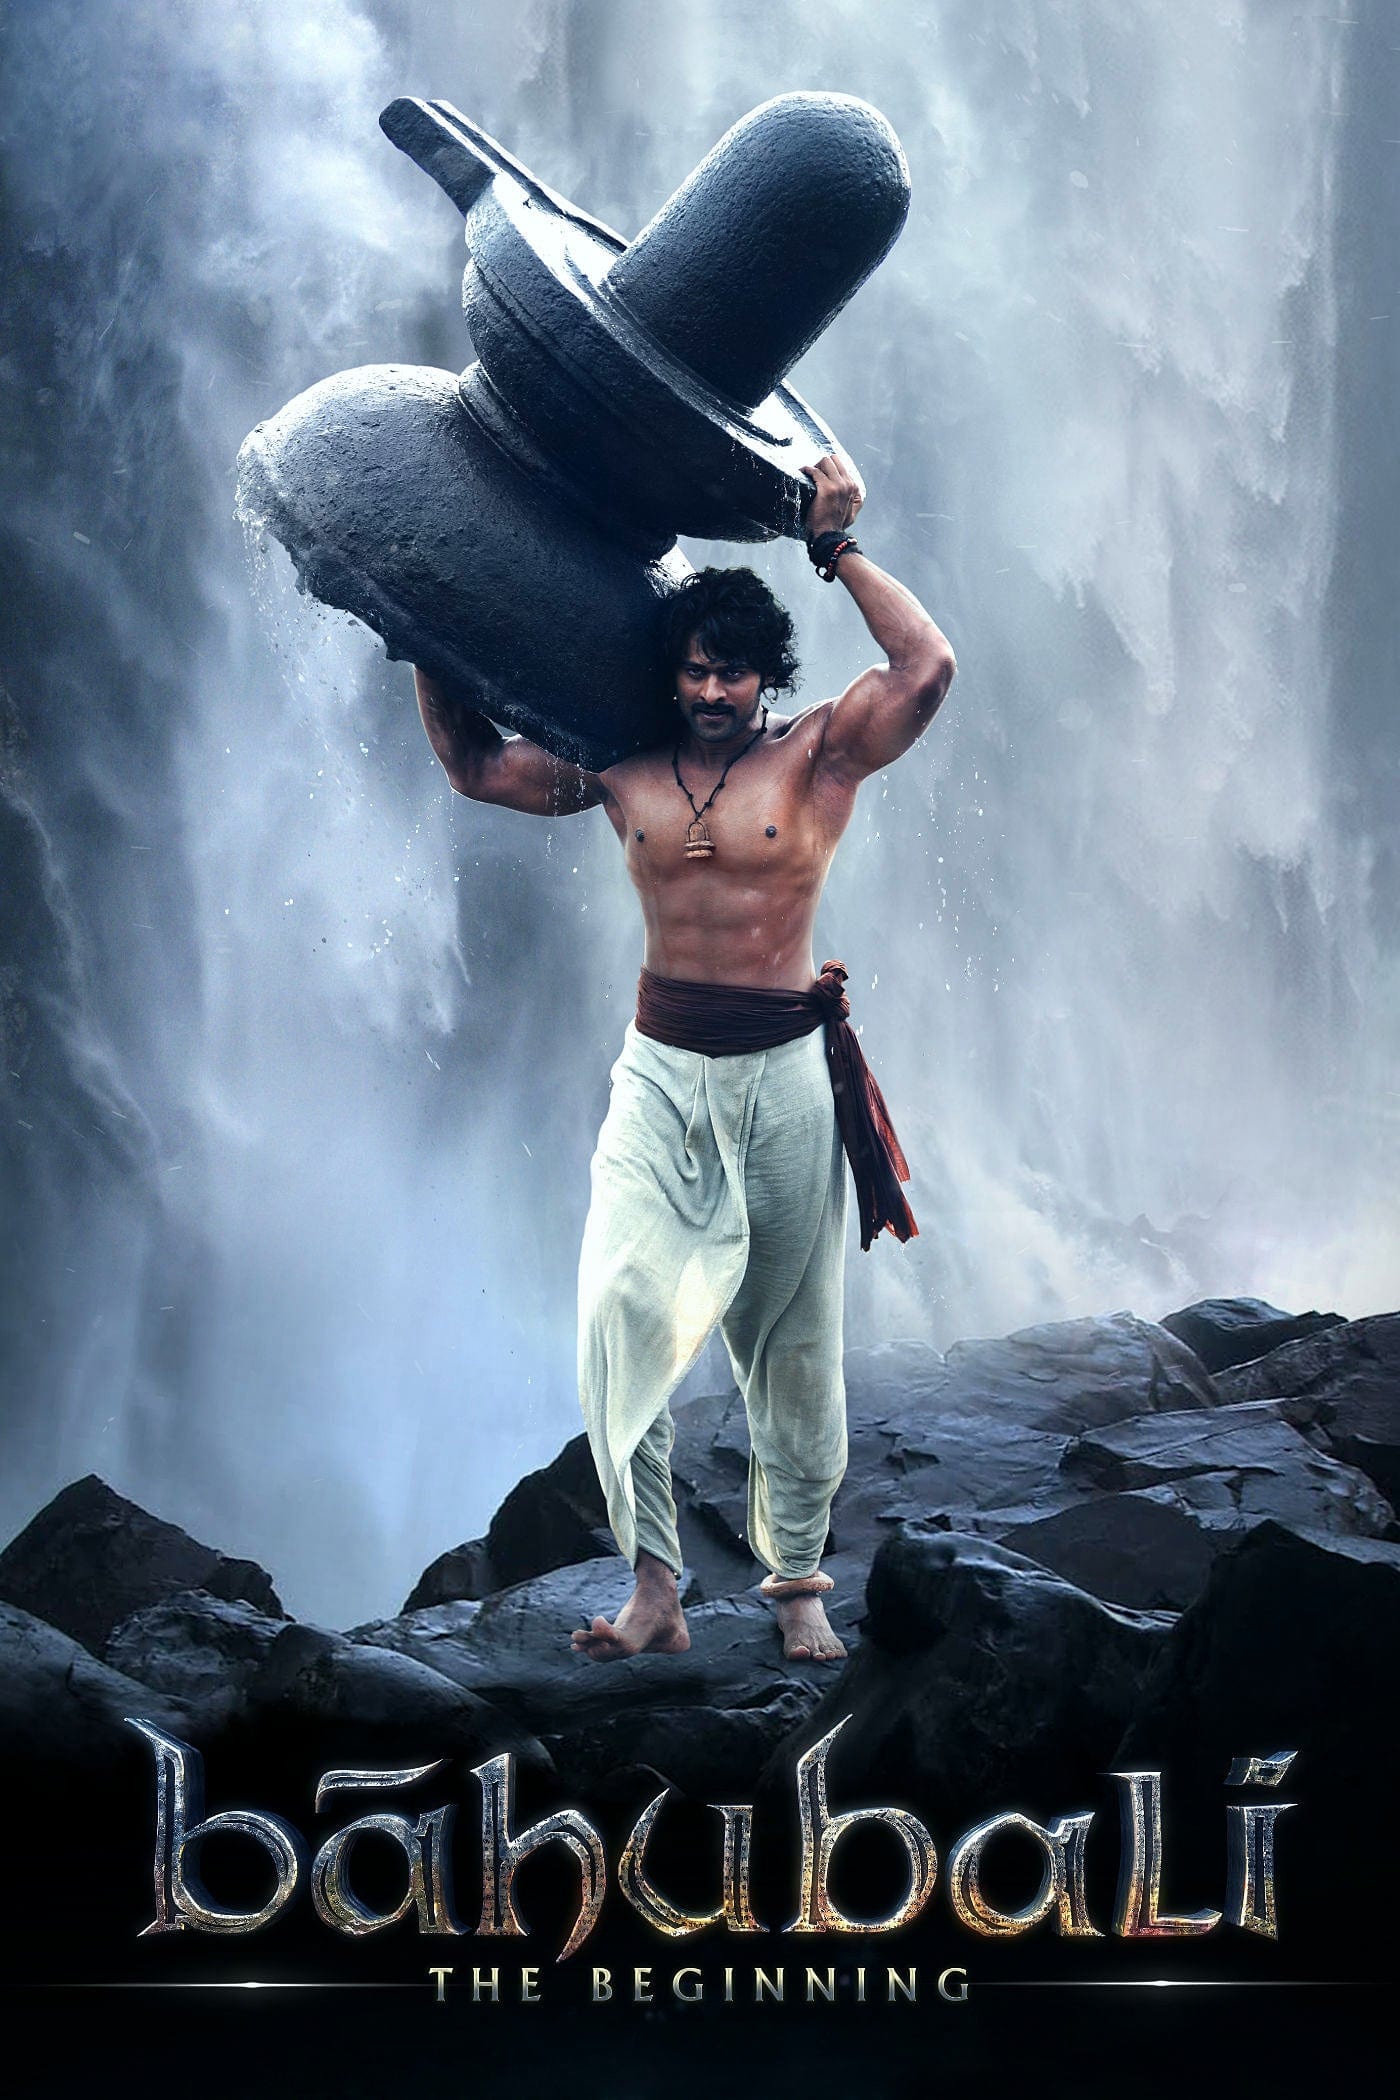 Poster for the movie "Bahubali: The Beginning"